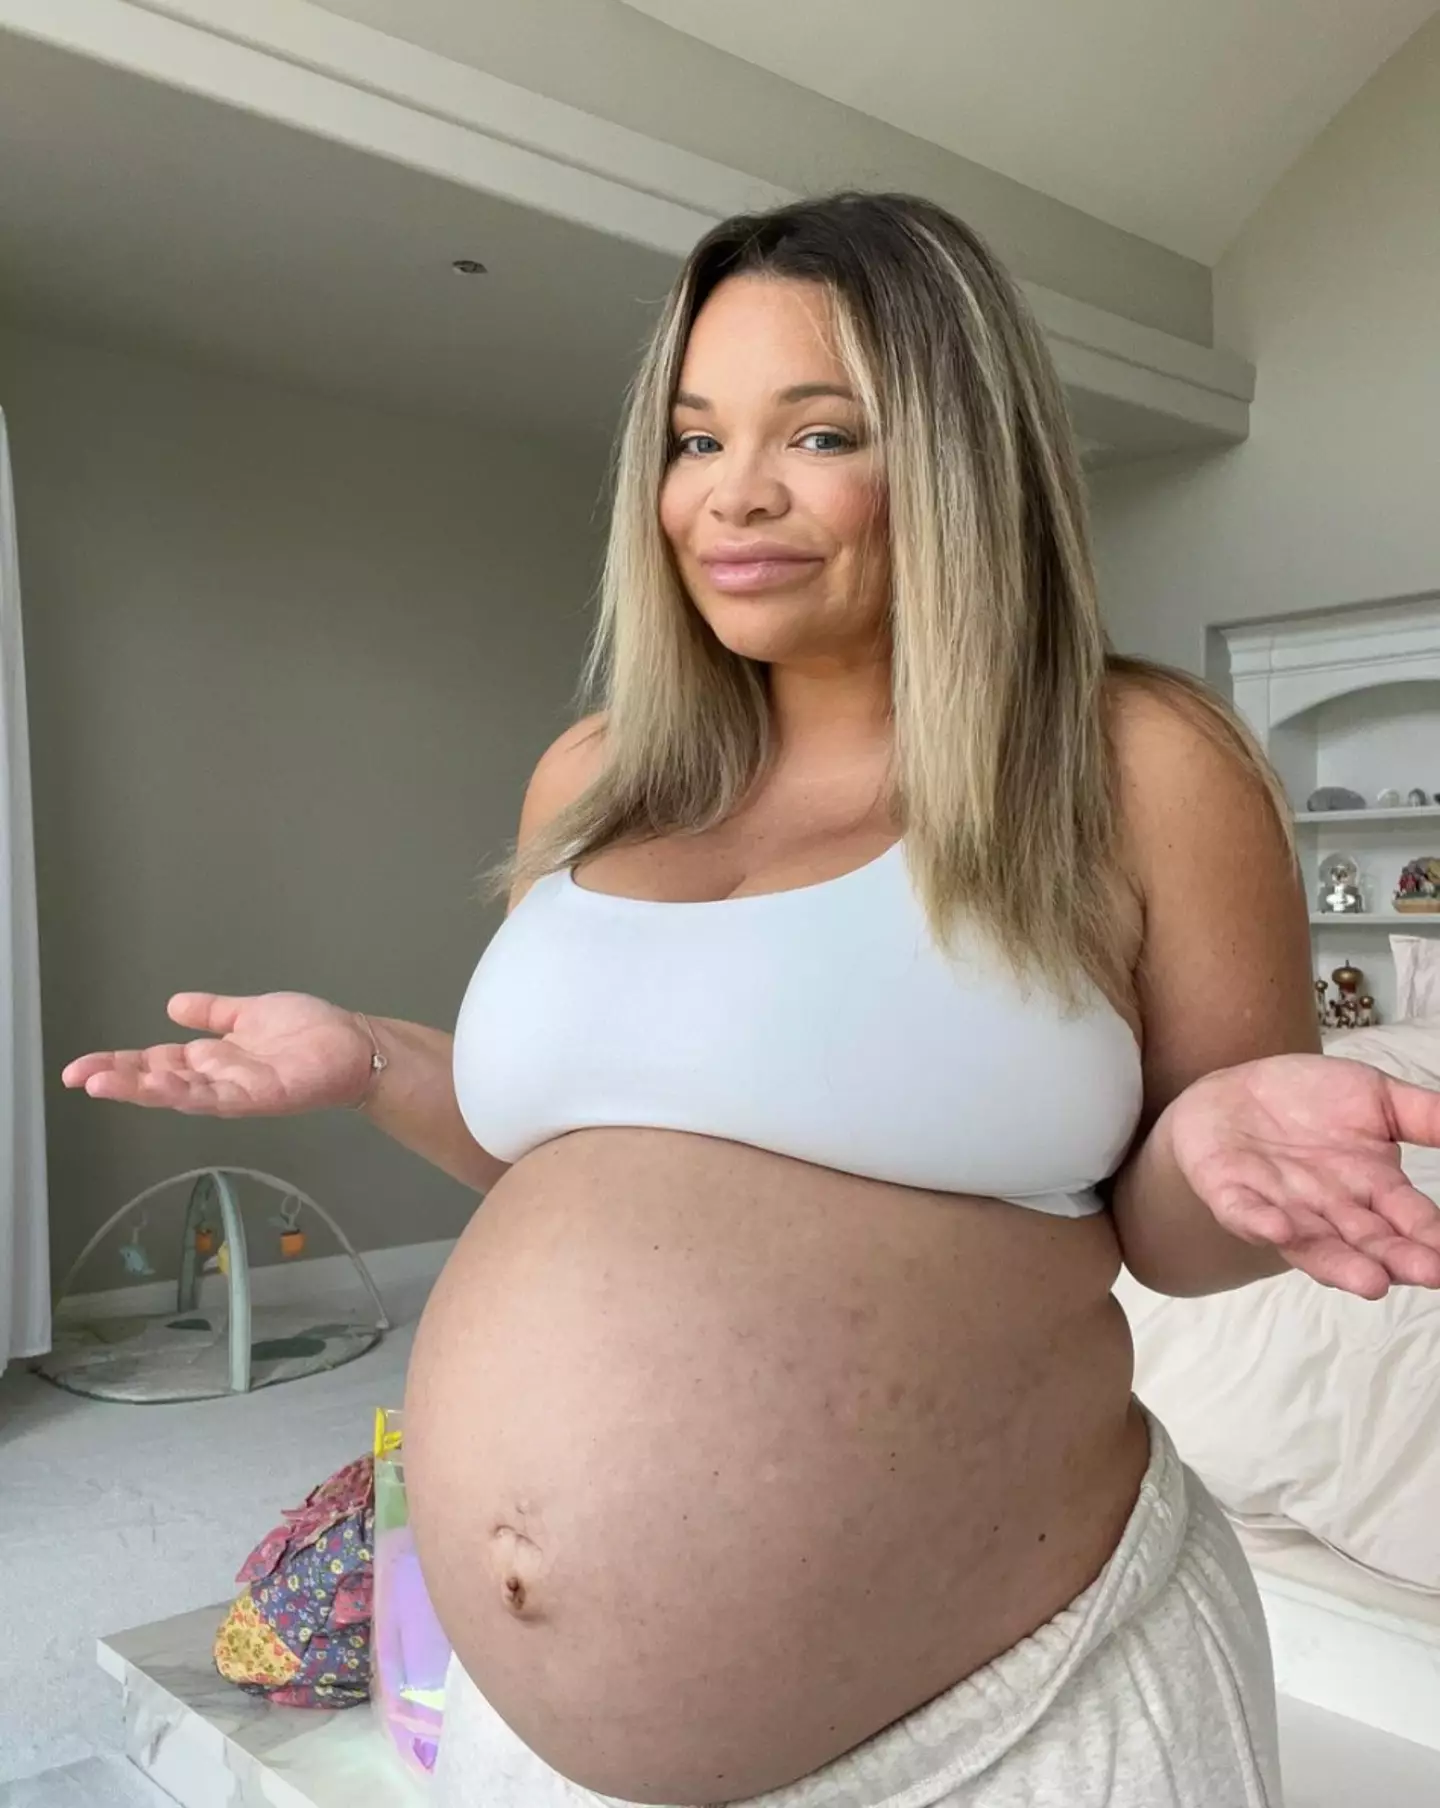 The YouTuber confirmed they were still pregnant at the time after the rumour.